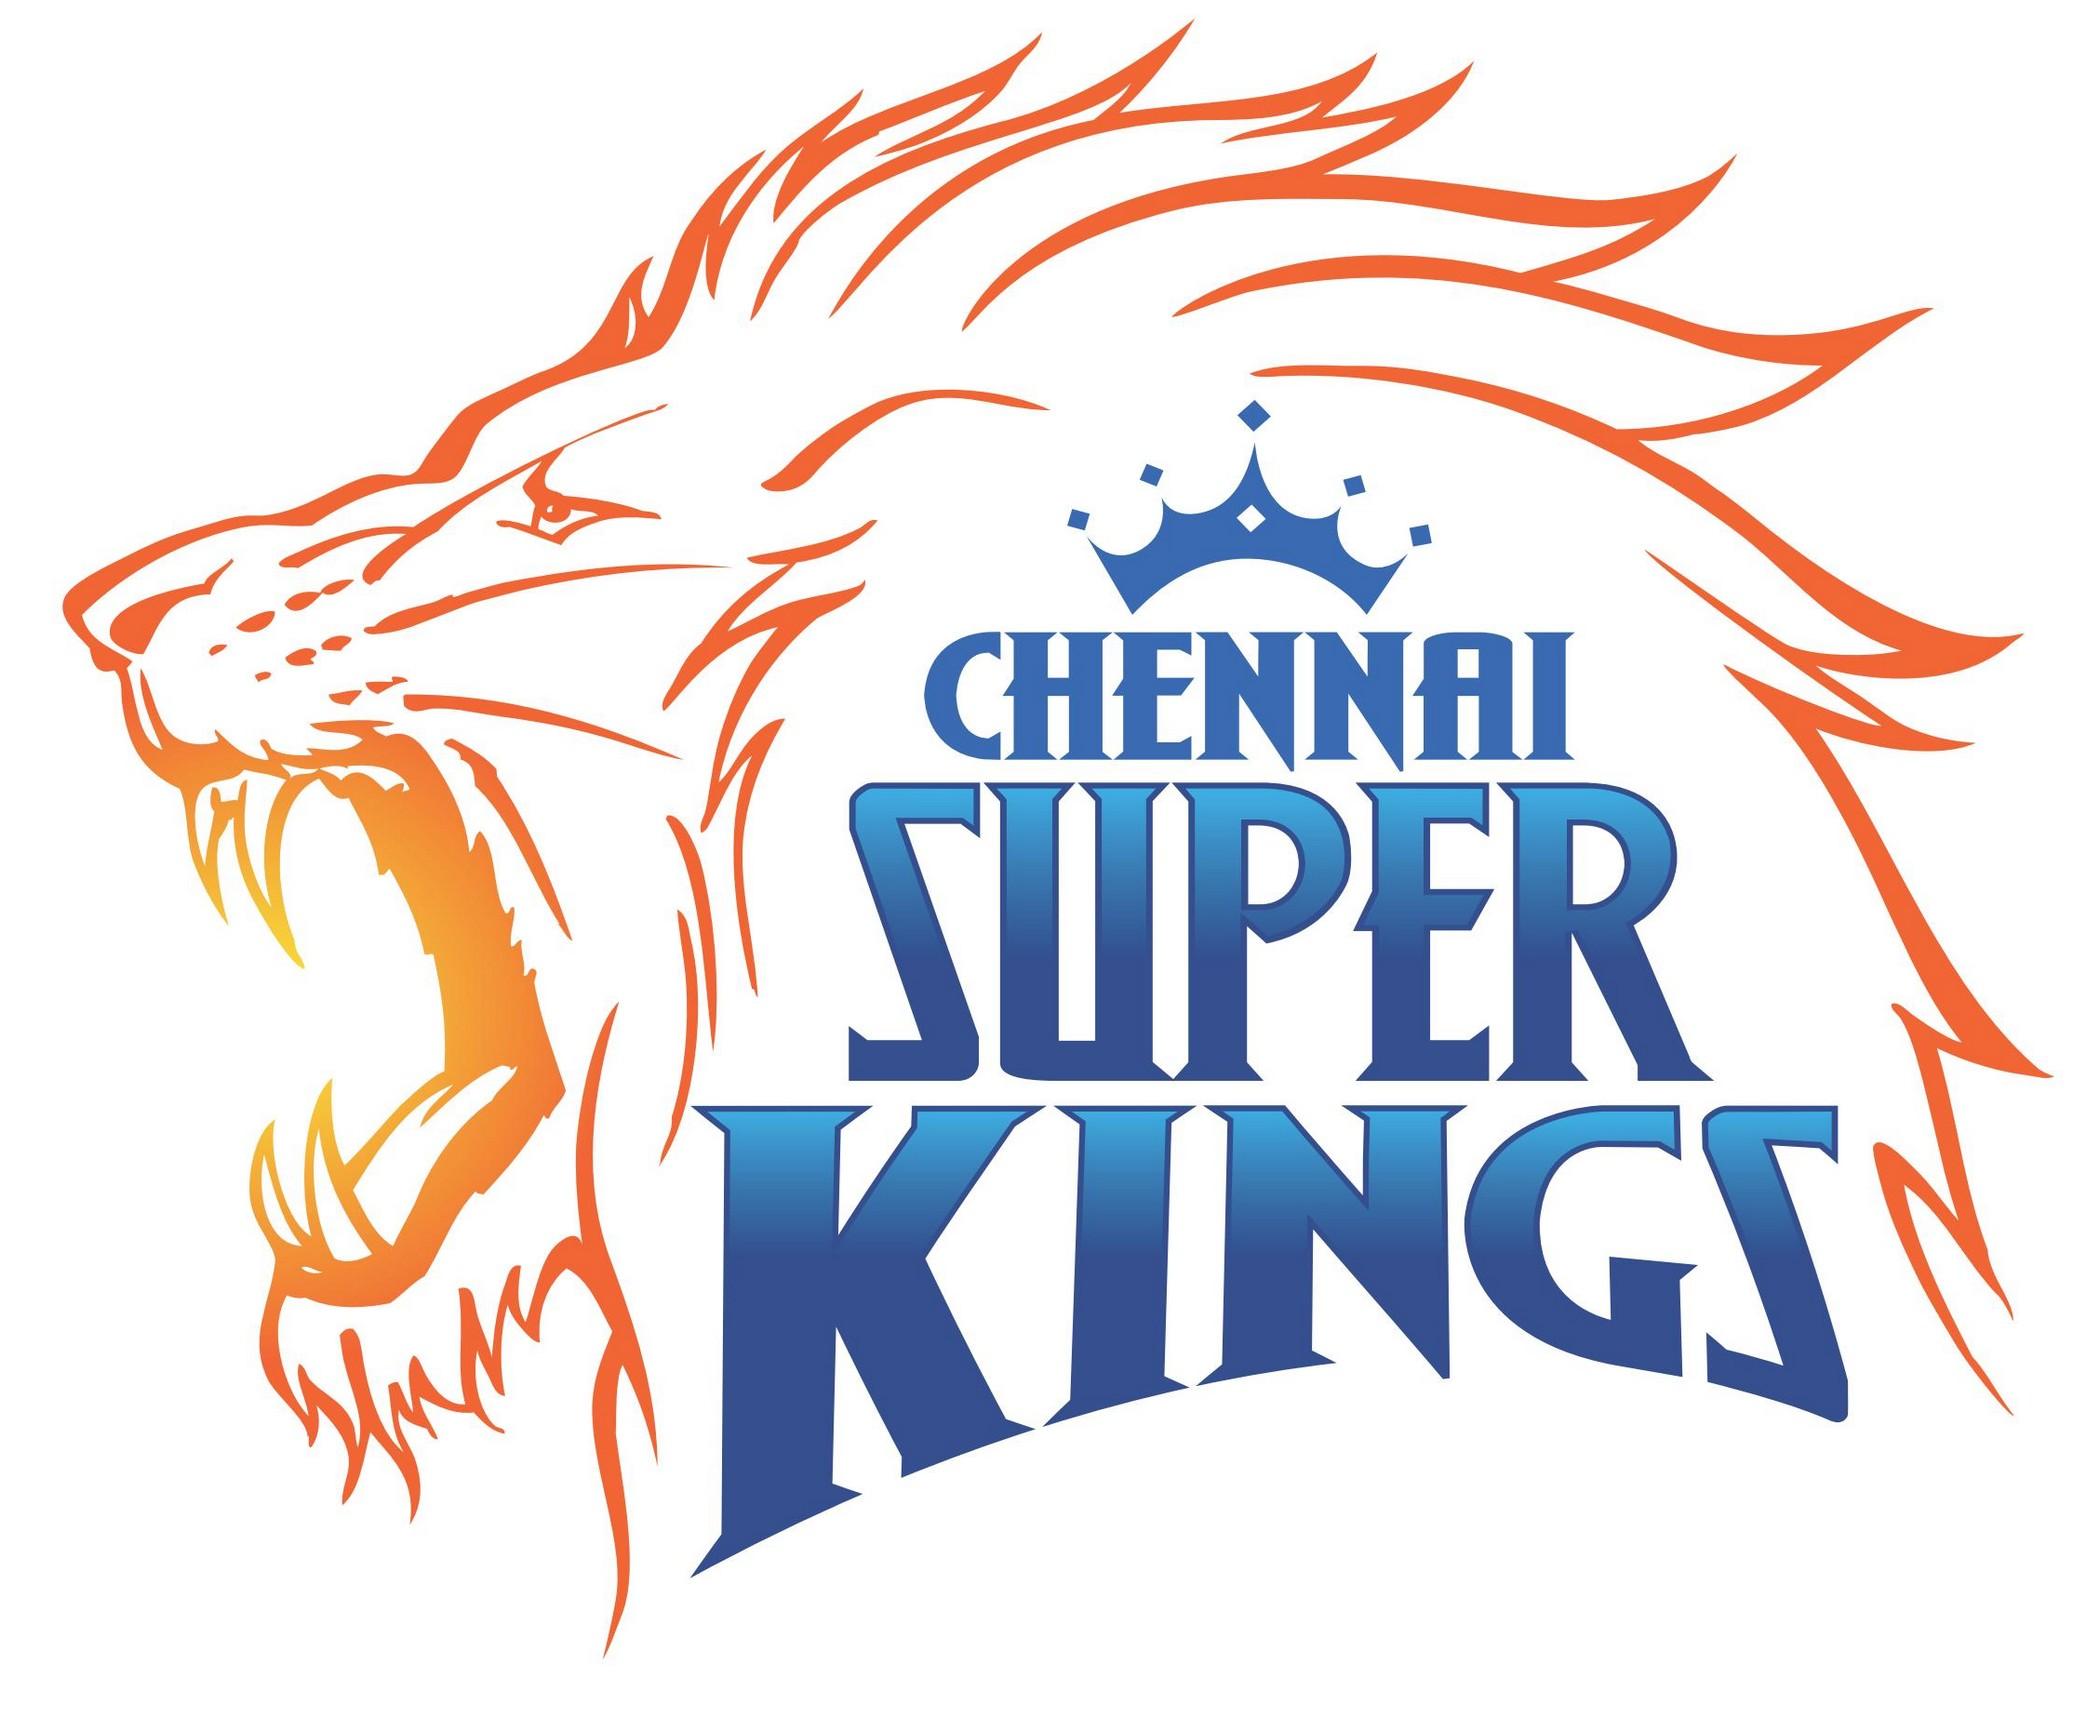 Chennai super kings picture download